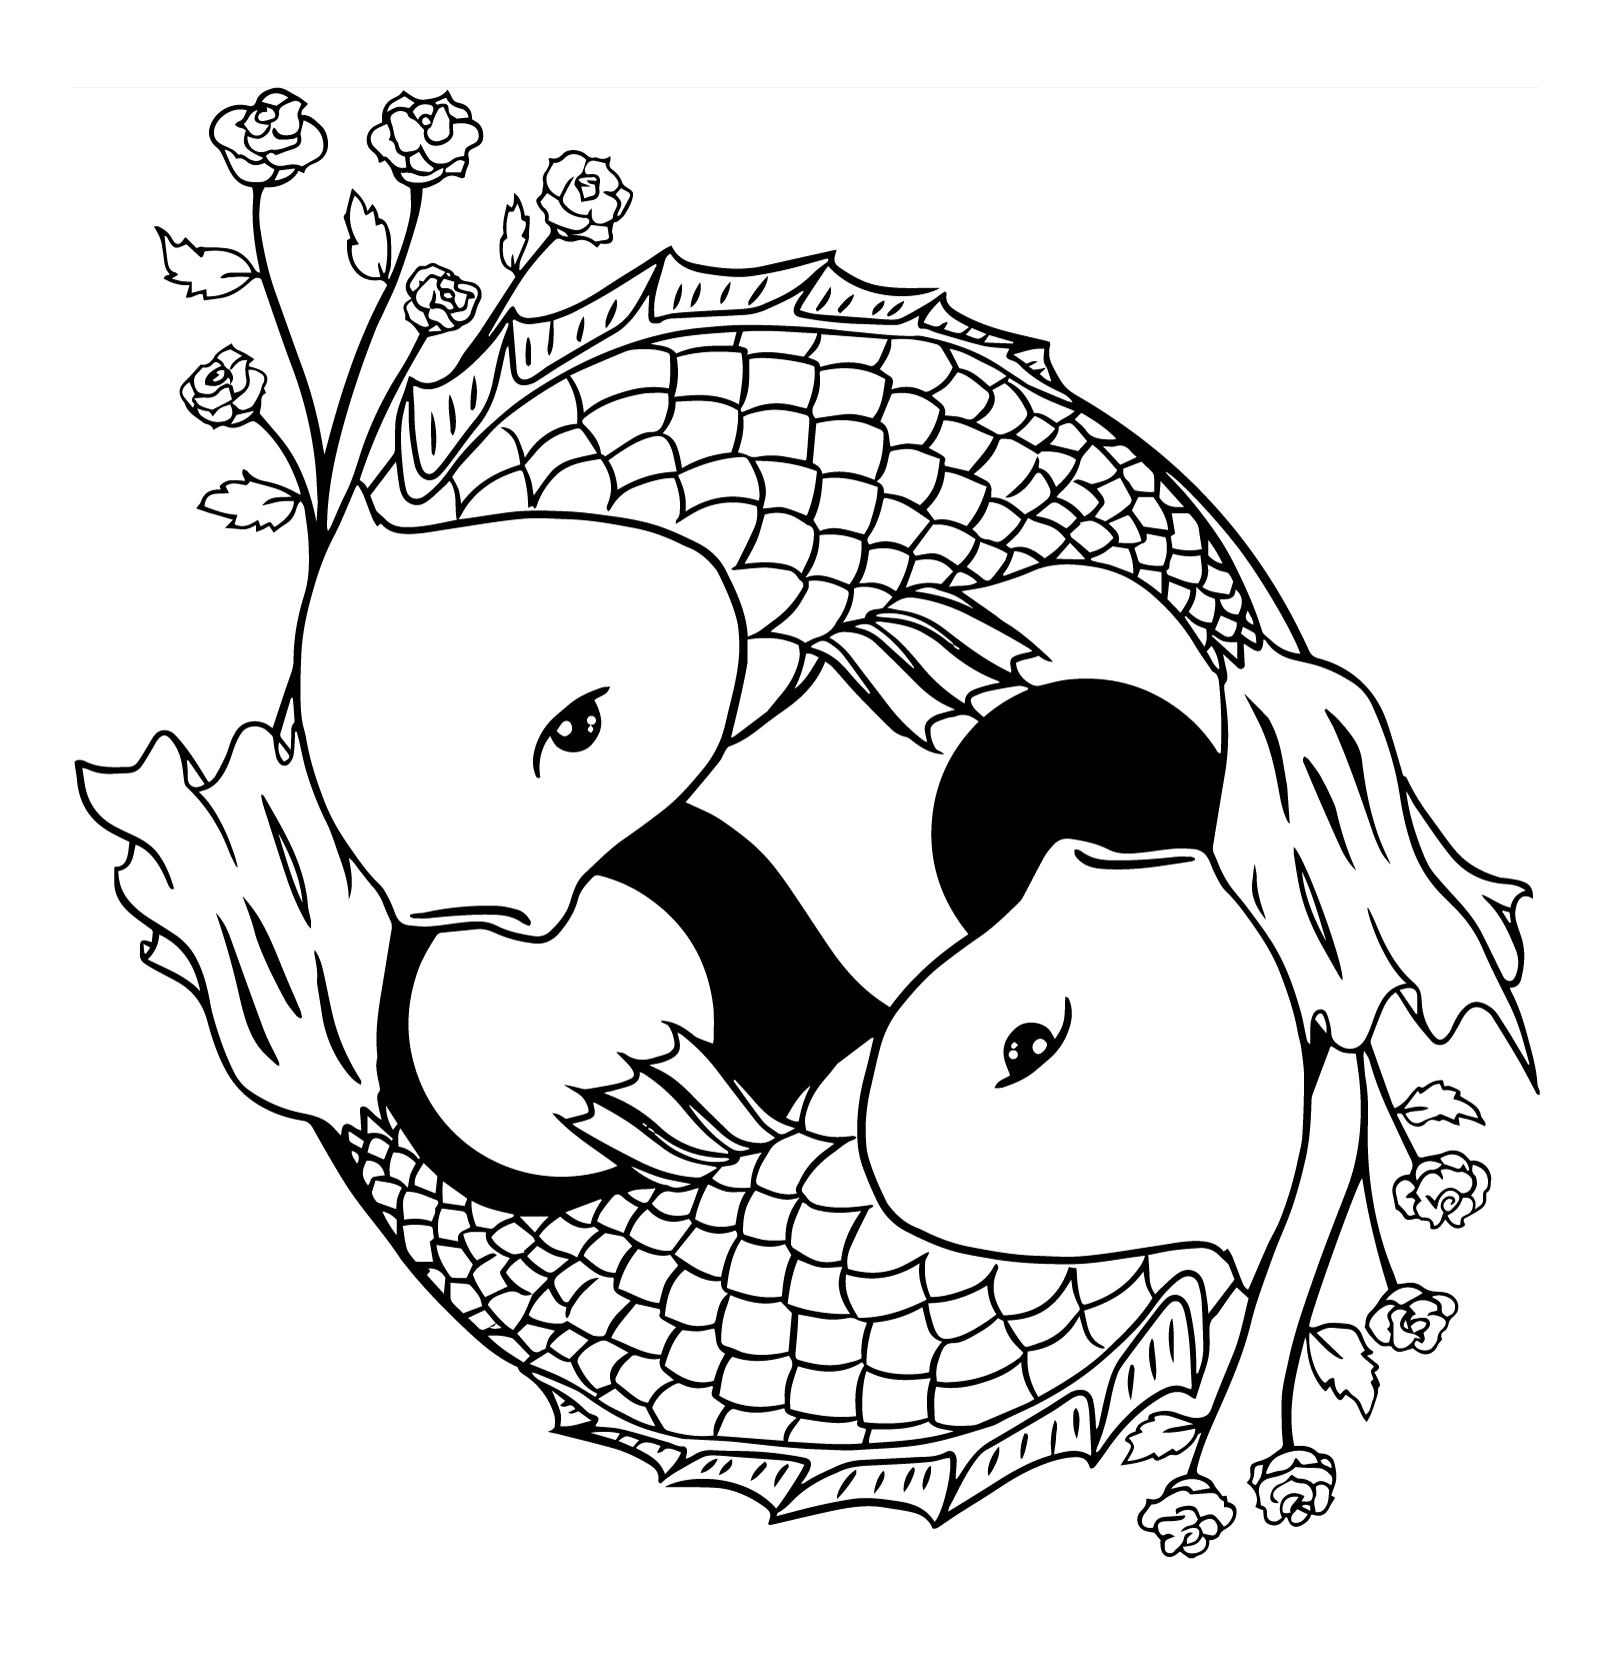 koi-fish-coloring-pages-to-download-and-print-for-free